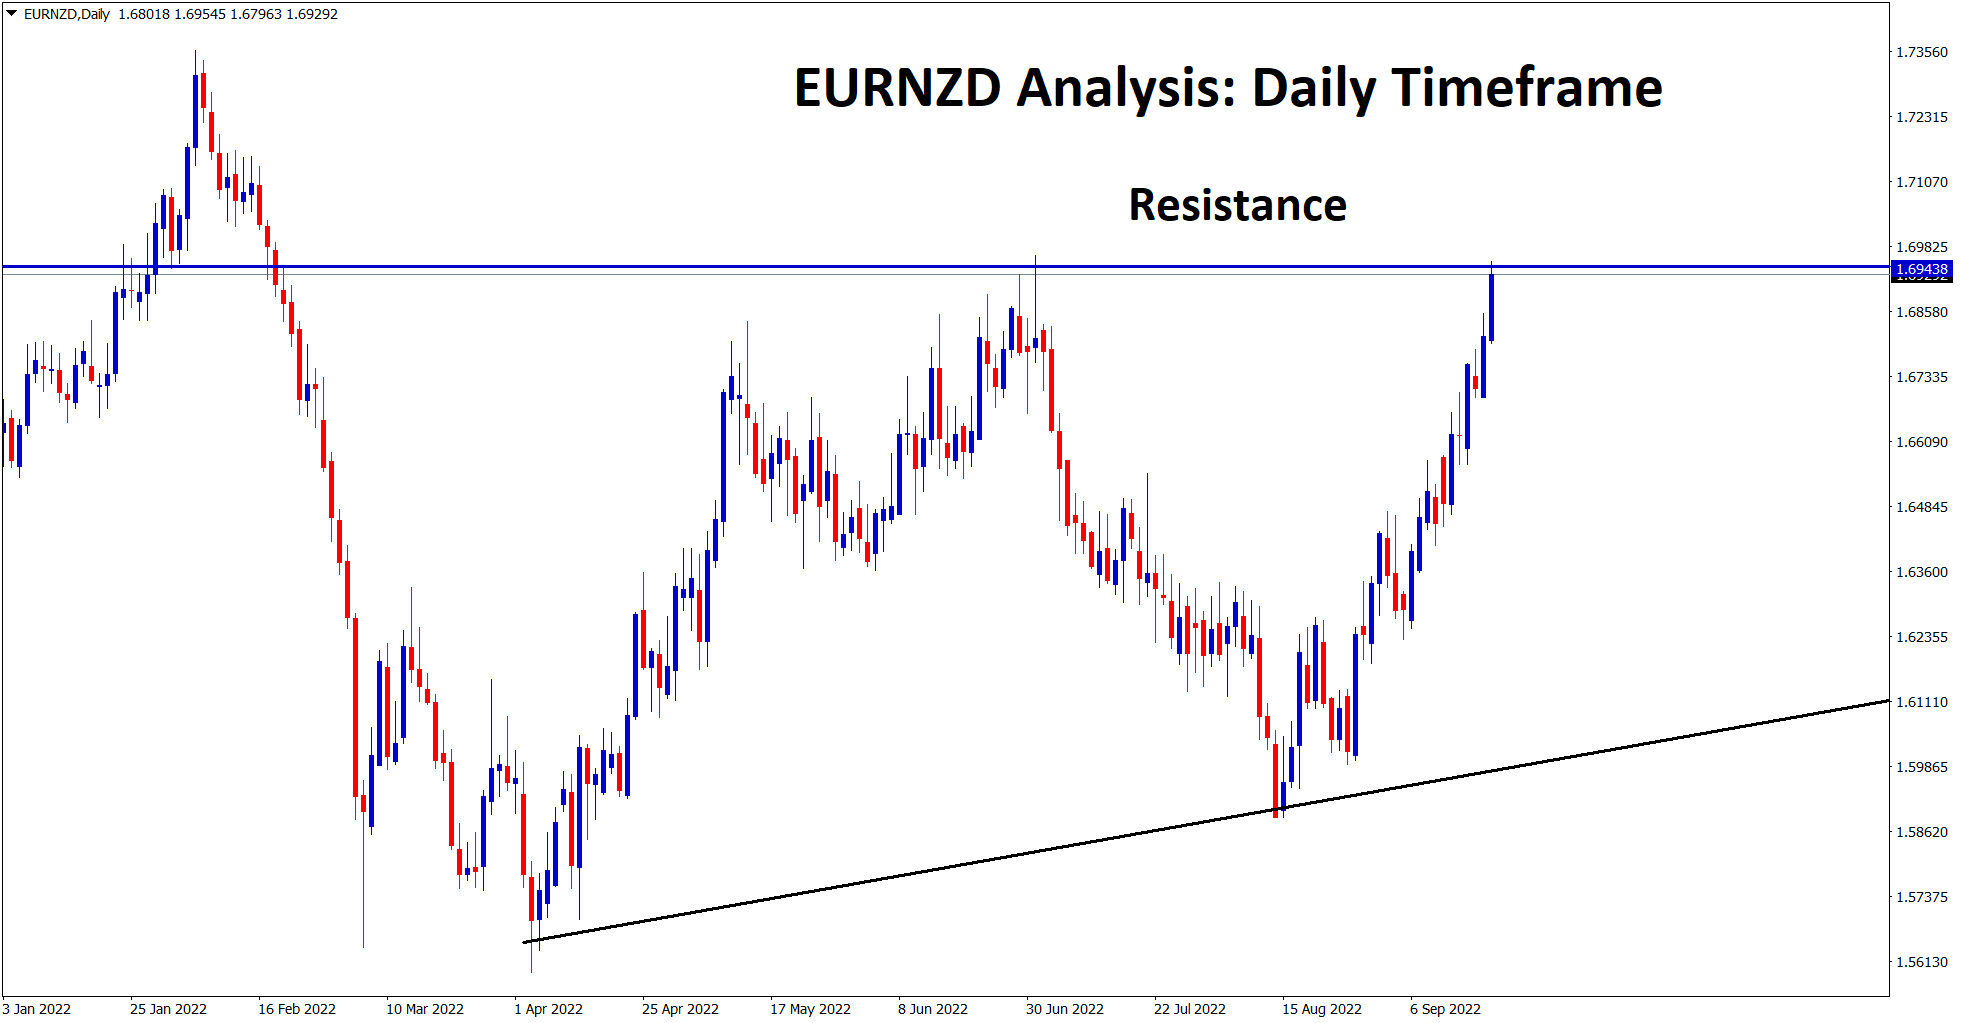 EURNZD at the resistance area in the daily timeframe